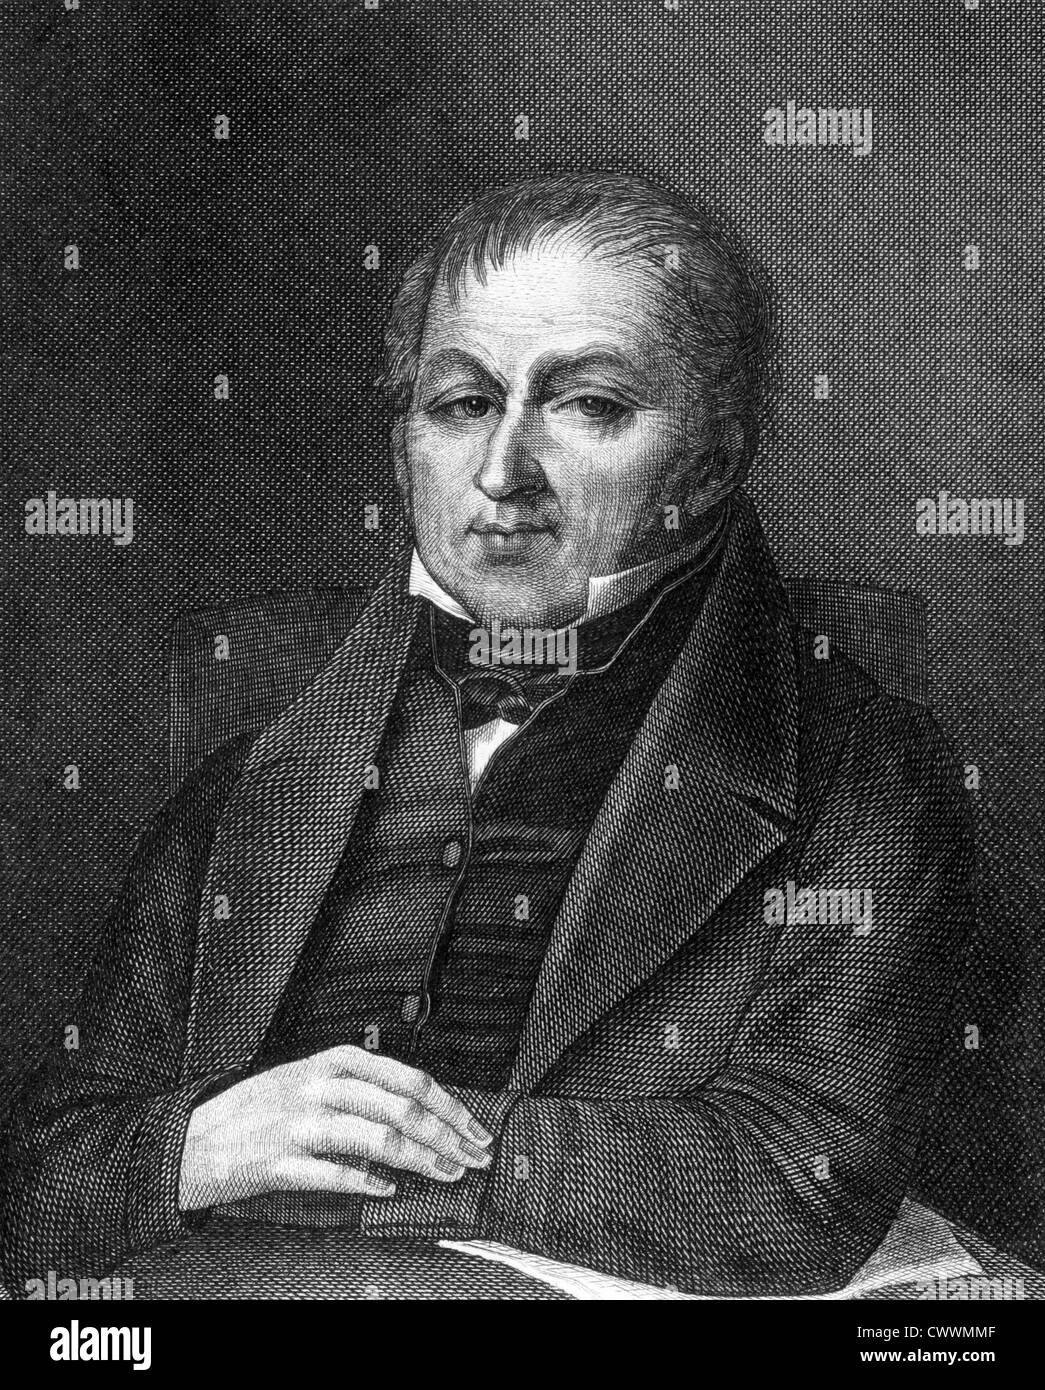 Jacques-Charles Dupont de l'Eure (1767-1855) on engraving from 1859. French lawyer and statesman. Stock Photo